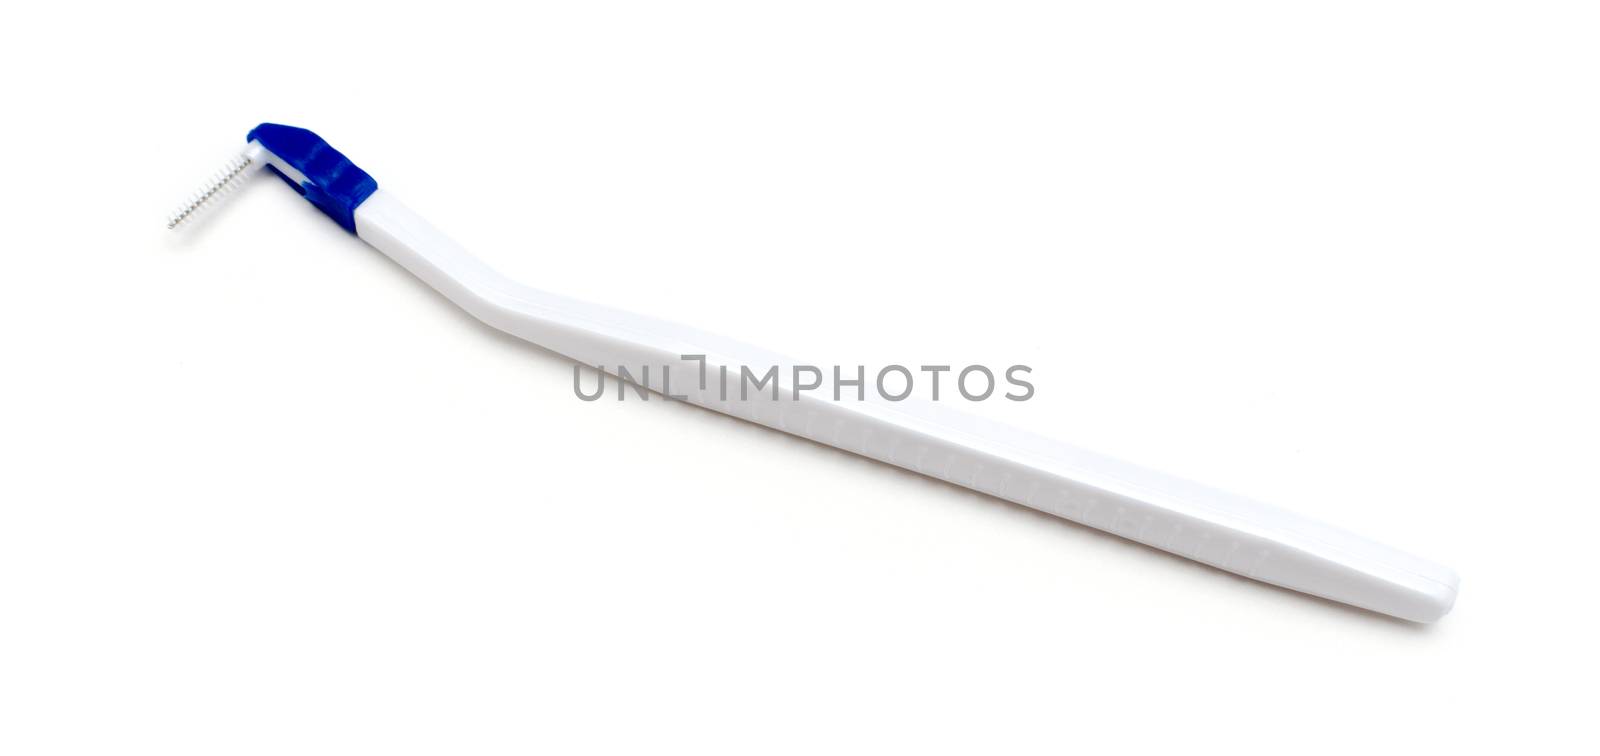 toothbrush between the teeth on an isolated white background